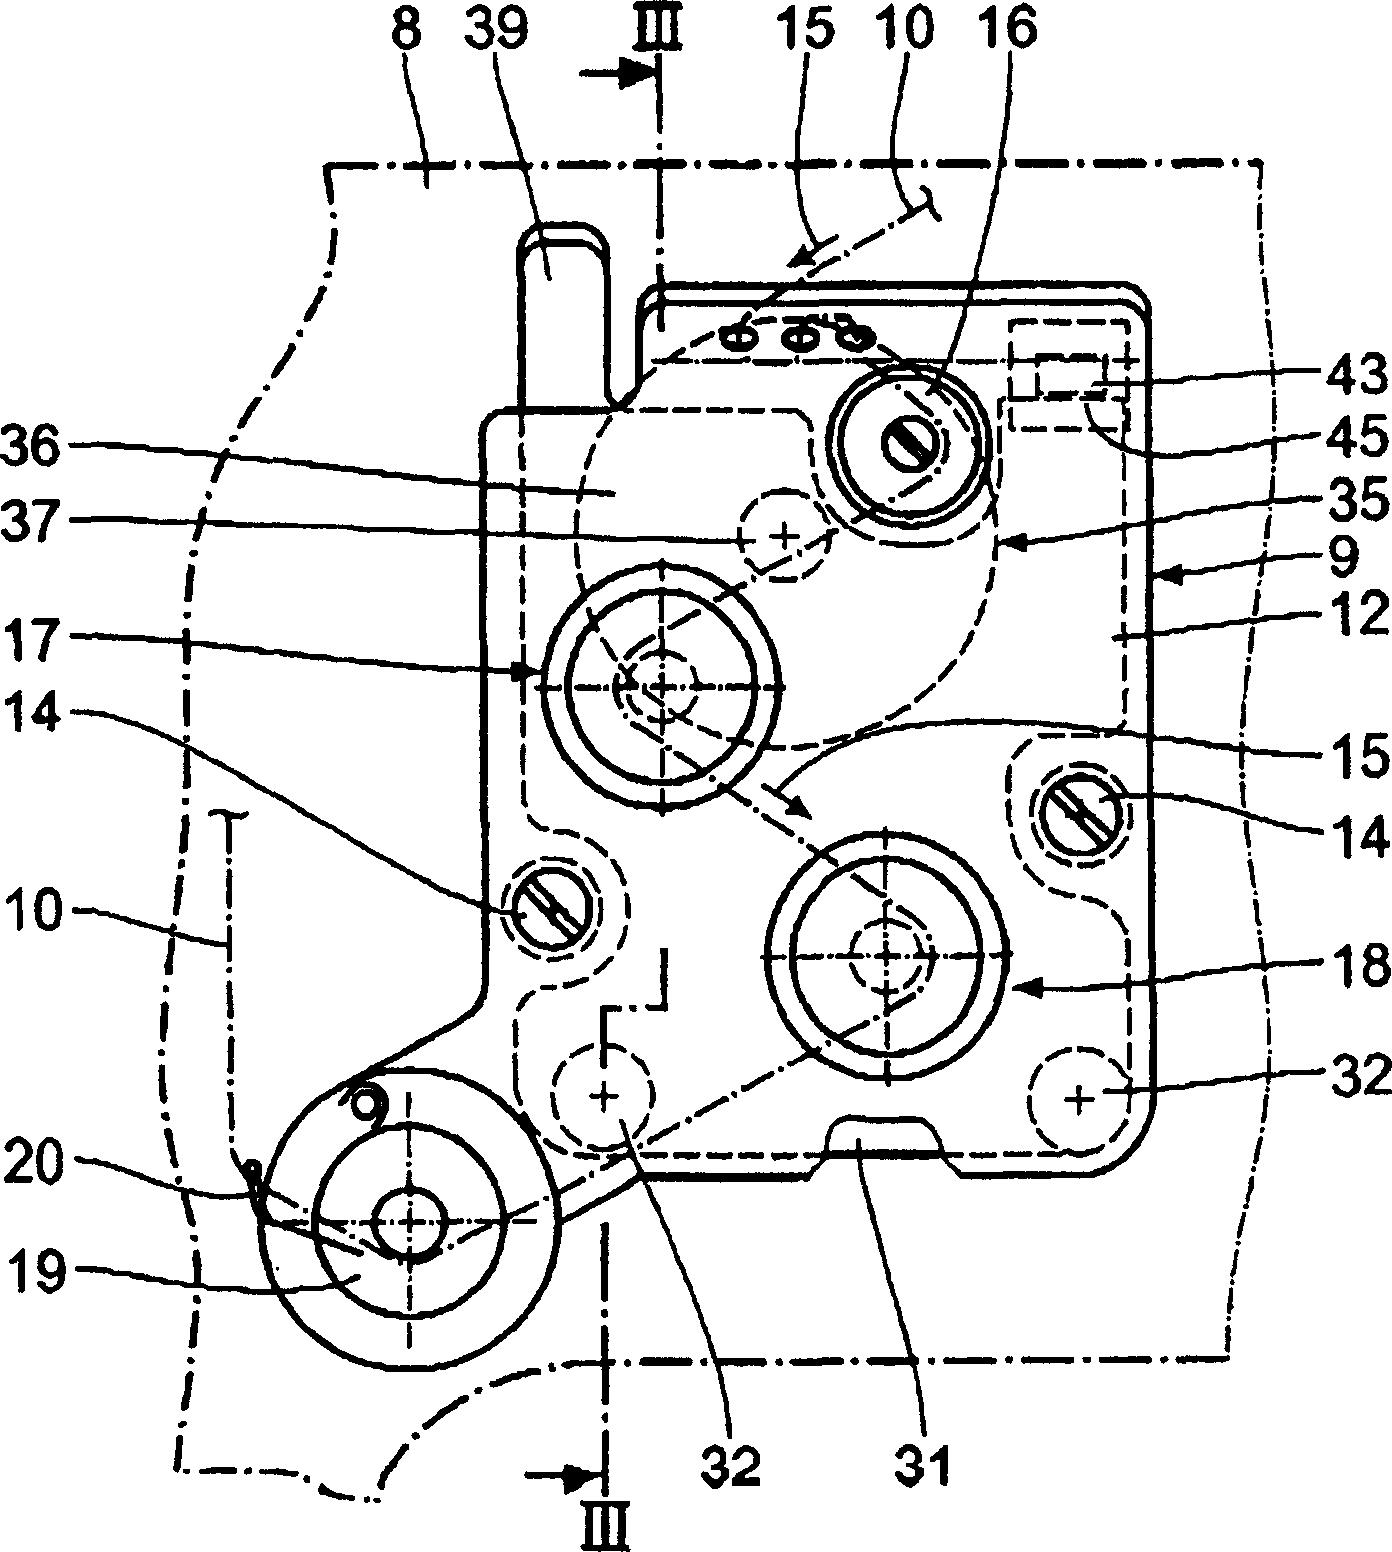 Thread tensioner for a sewing machine